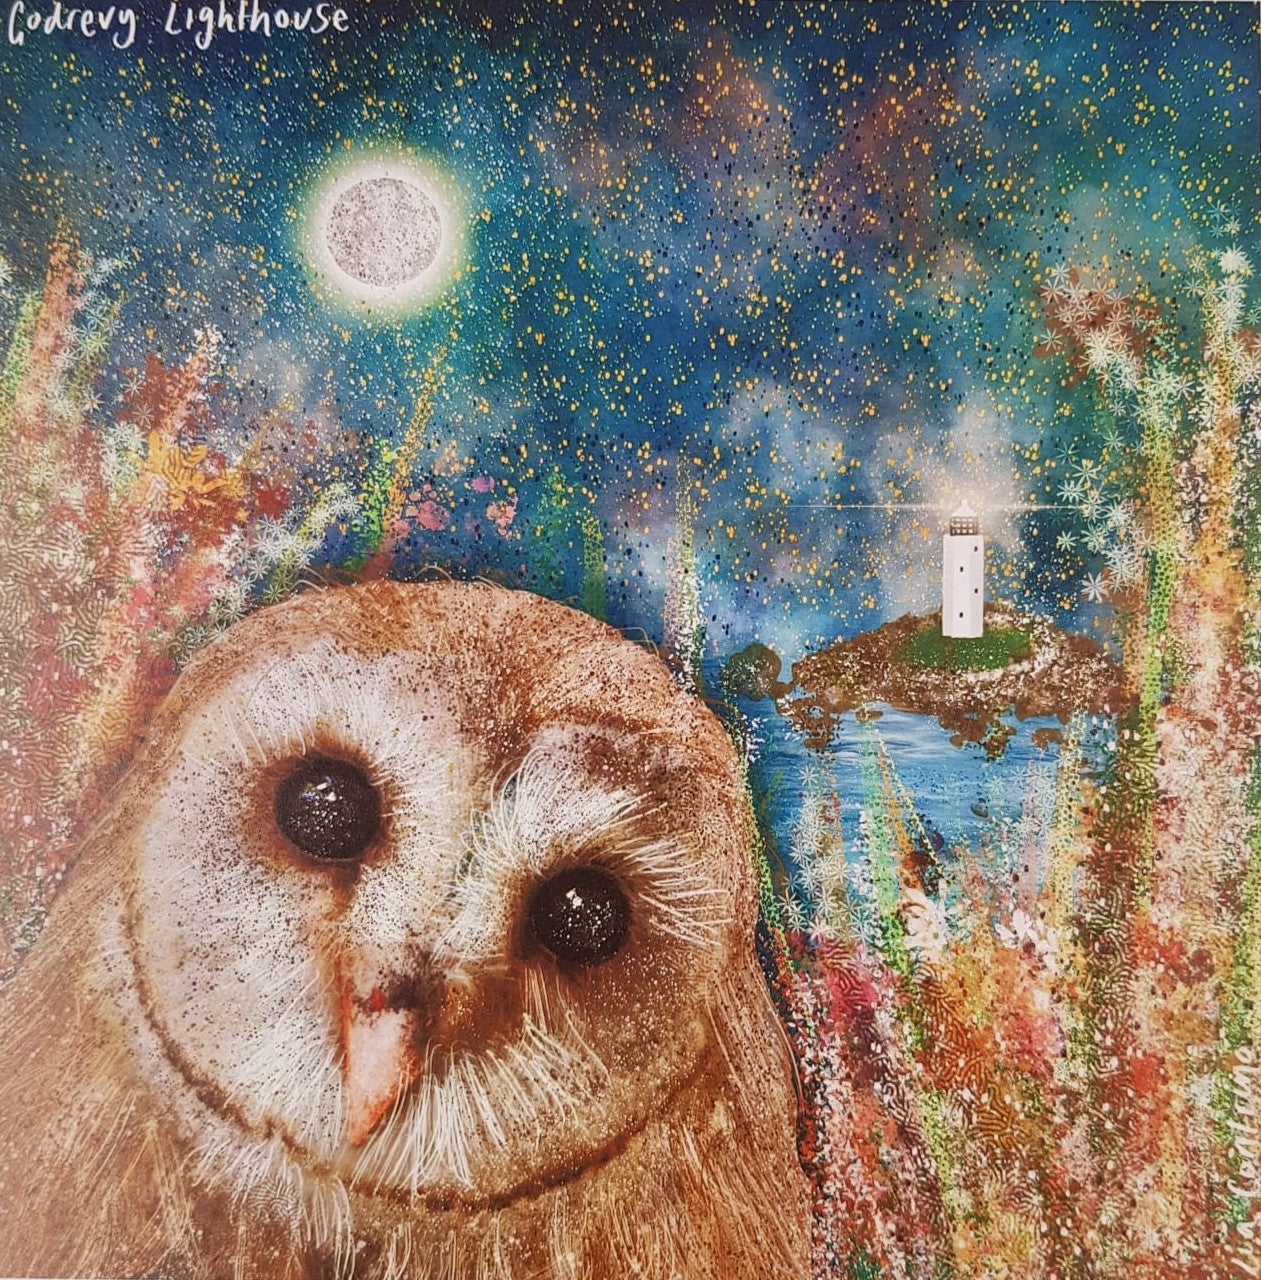 Owl And Godrevy Lighthouse